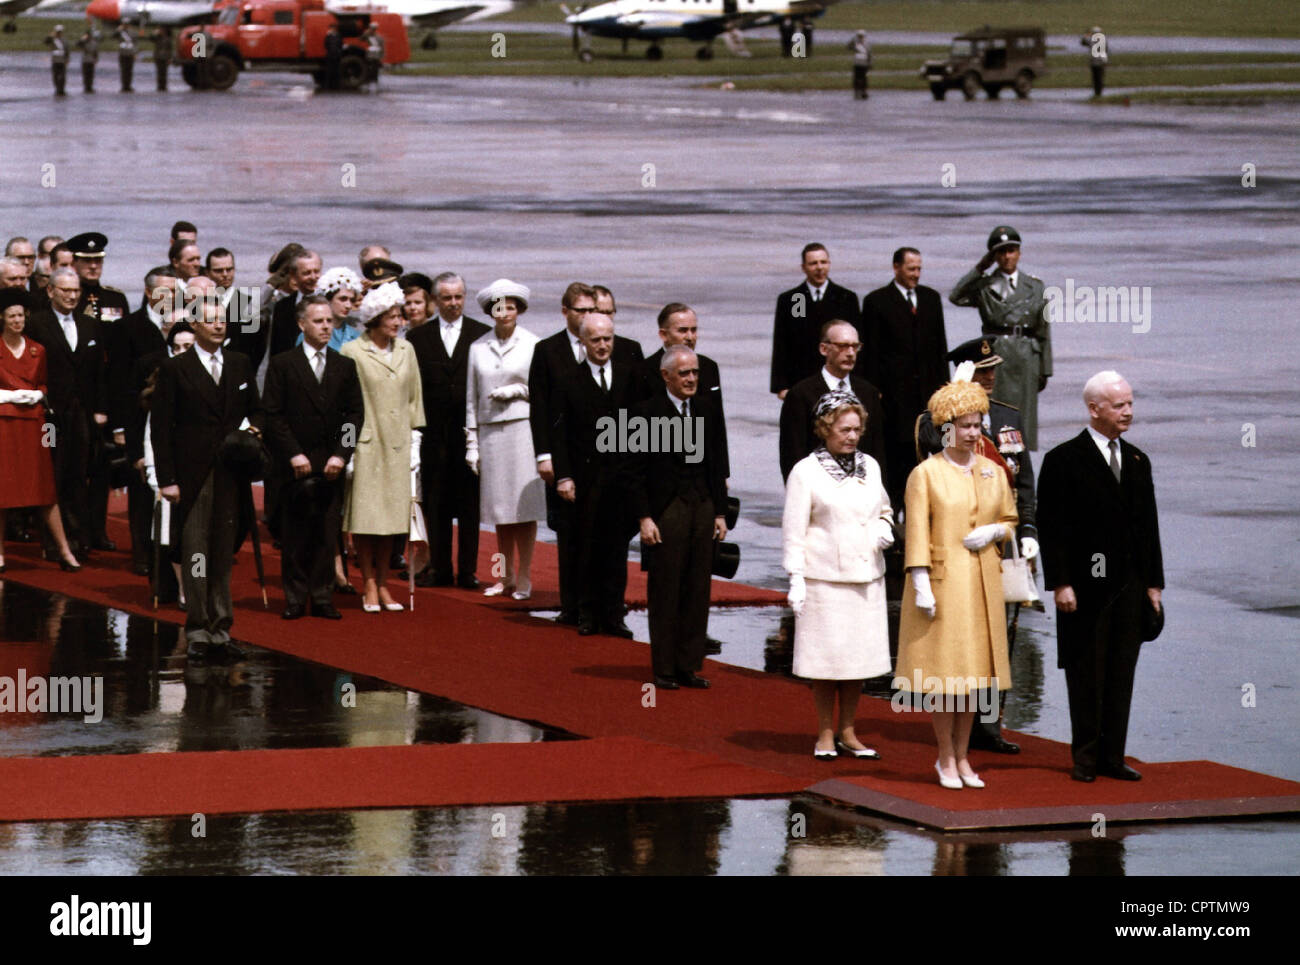 Elizabeth II, * 21.4.1926, Queen of the United Kingdom since 1952, state visit to Germany 1965, arrival at the airport Wahn, with the President of Germany Heinrich Luebke, Stock Photo